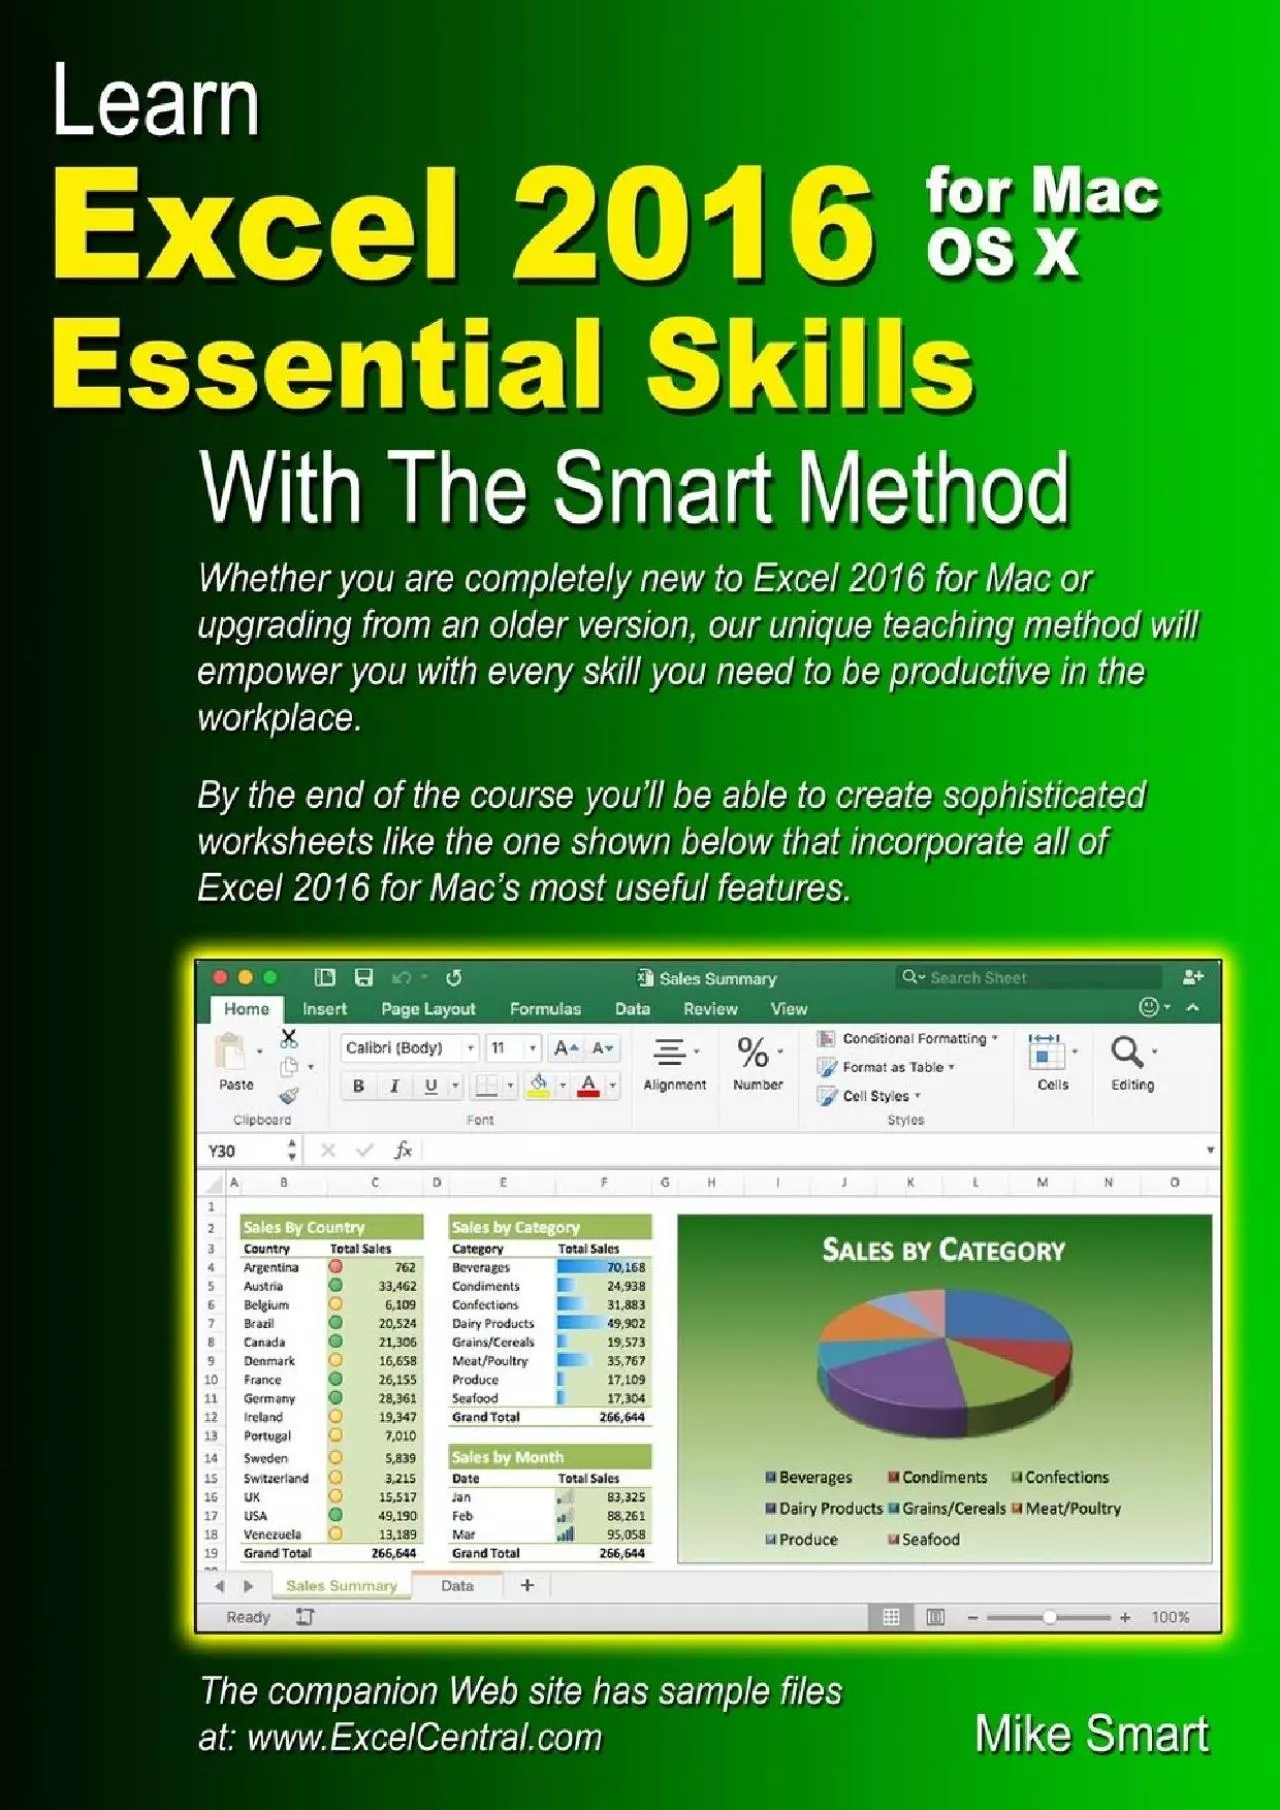 Learn Excel 2016 Essential Skills for Mac OS X with The Smart Method: Courseware tutorial